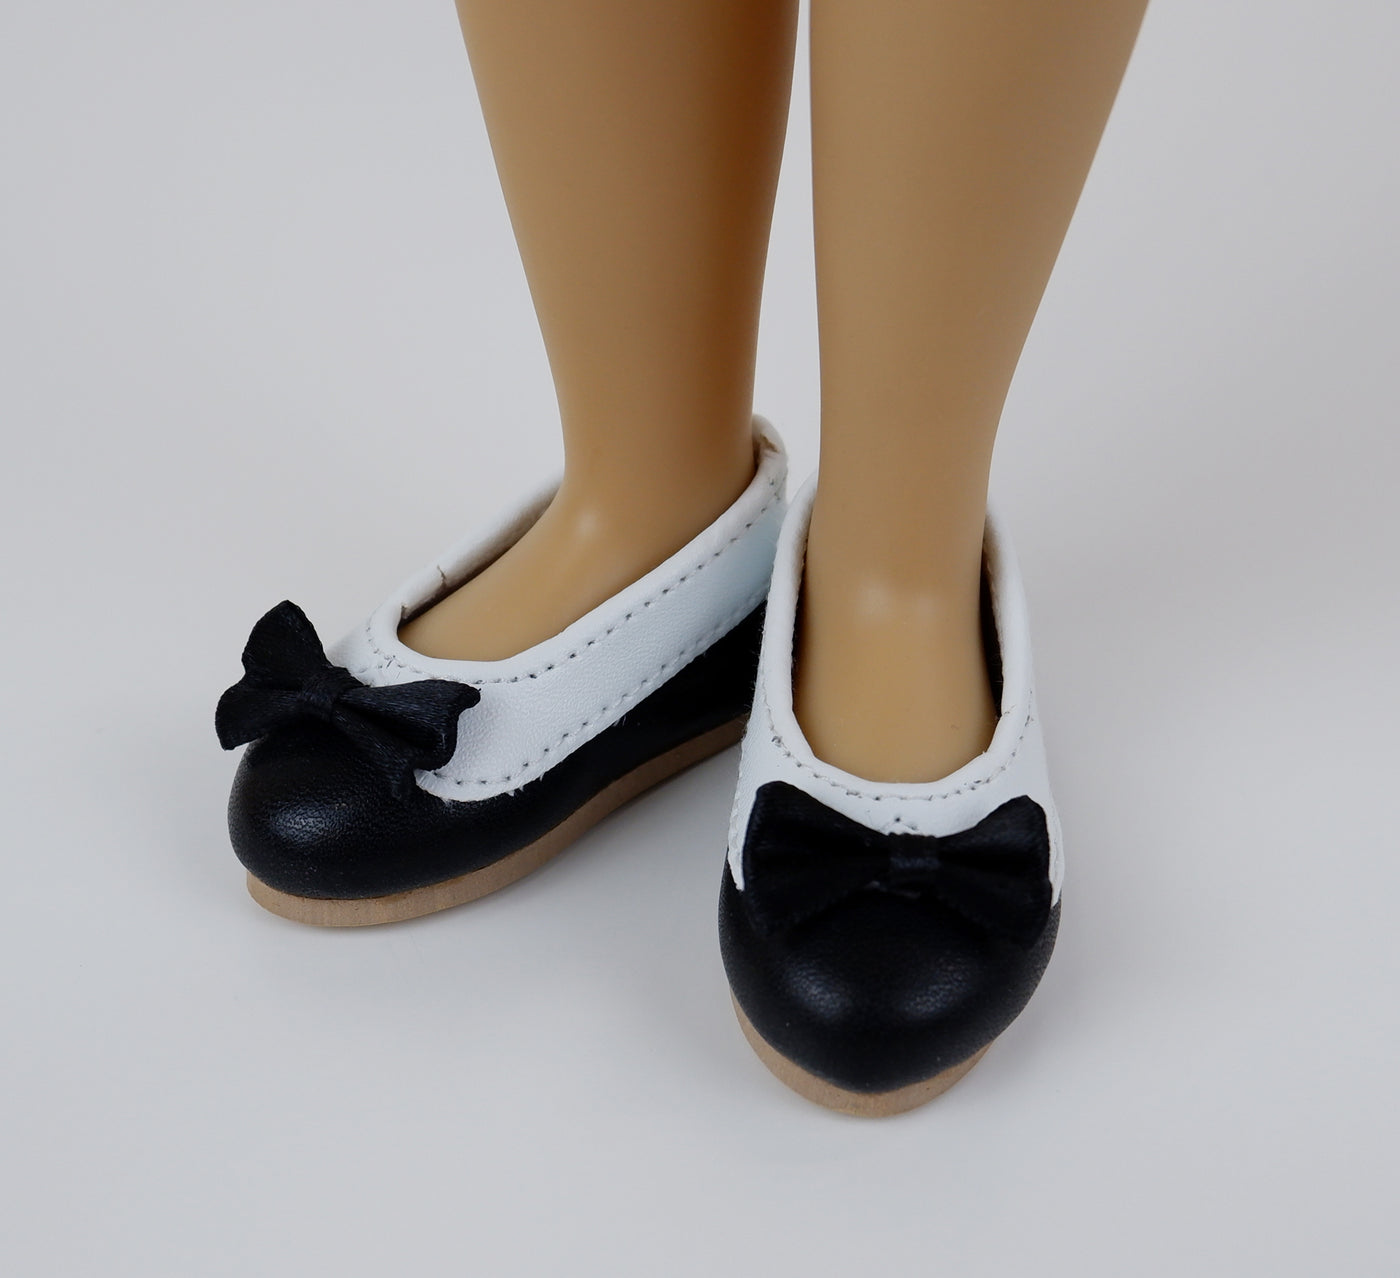 FACTORY SECONDS Collared Ballet Flats - Black & White